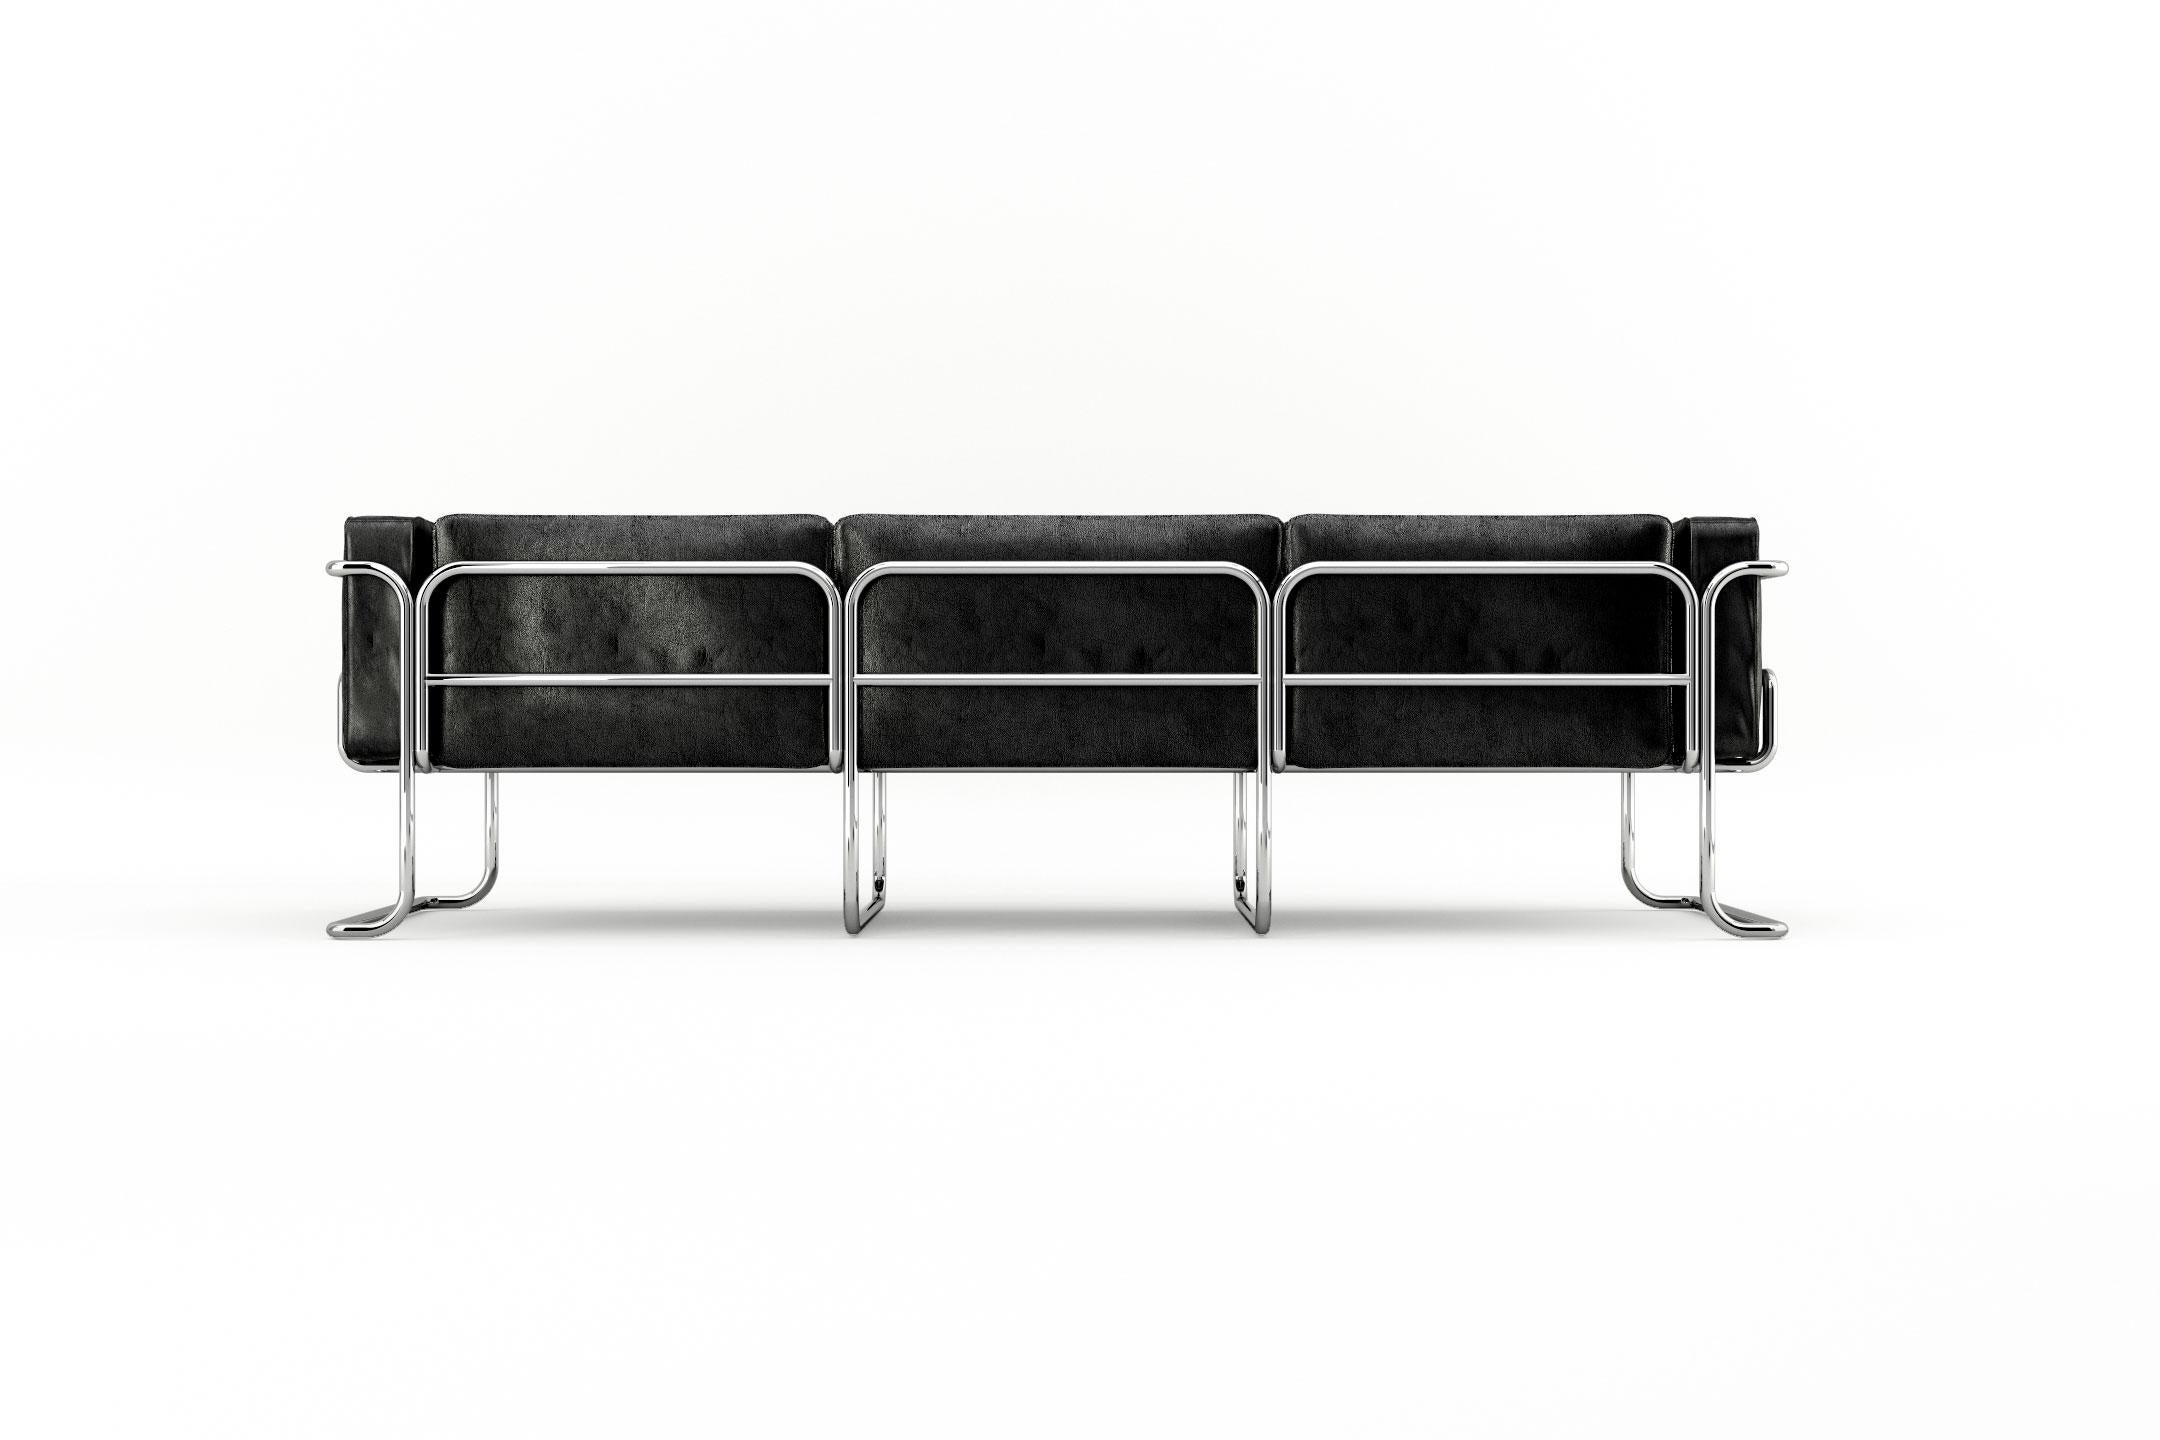 Lotus 3 Seat Sofa - Modern Black Leather Sofa with Stainless Steel Legs In New Condition For Sale In London, GB